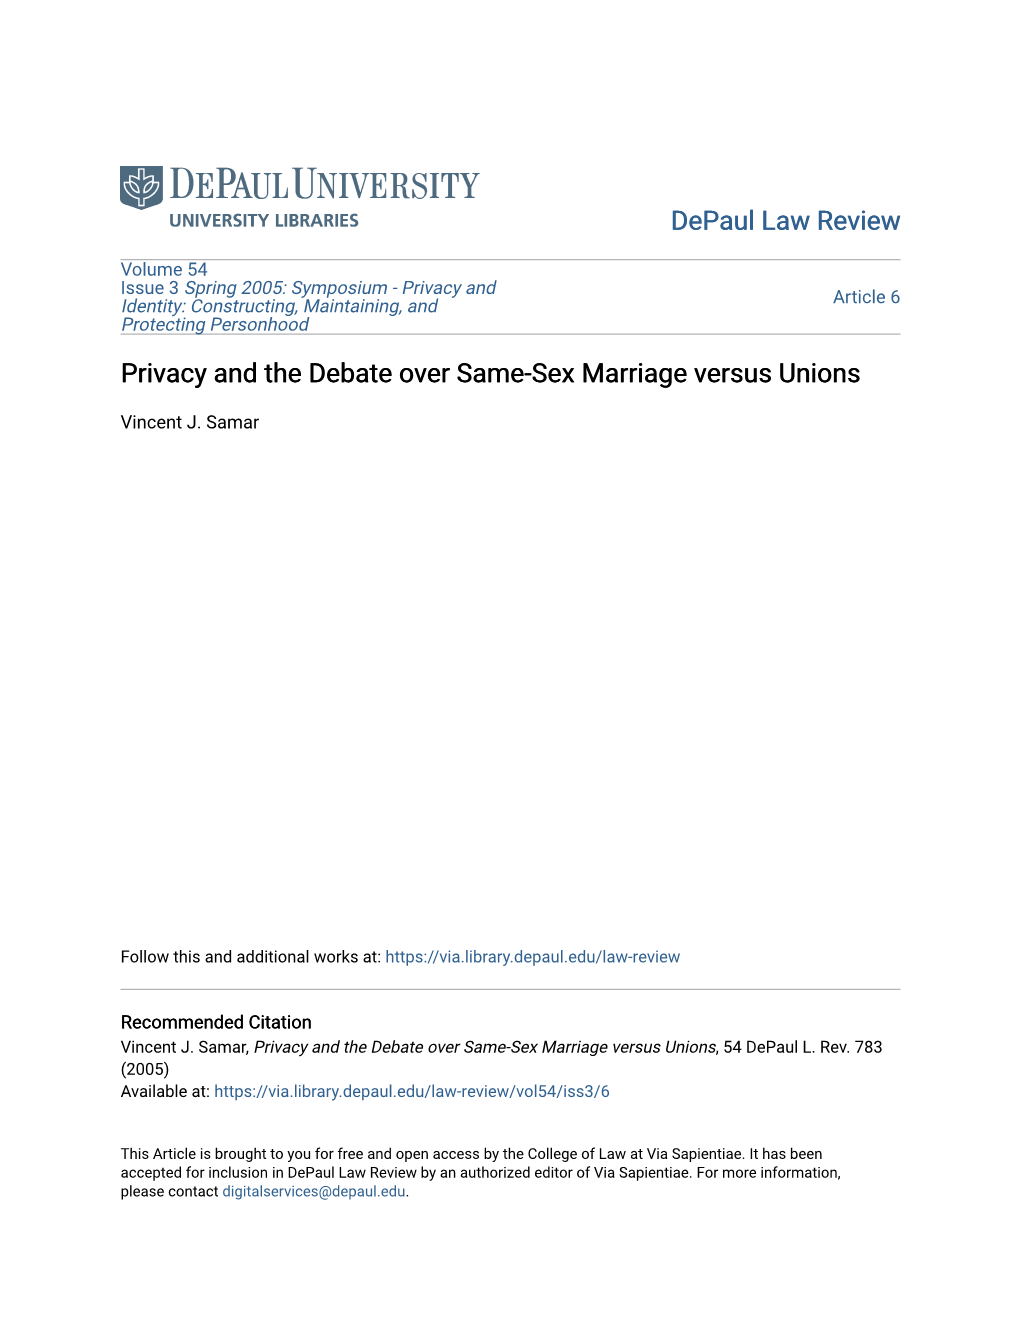 Privacy and the Debate Over Same-Sex Marriage Versus Unions